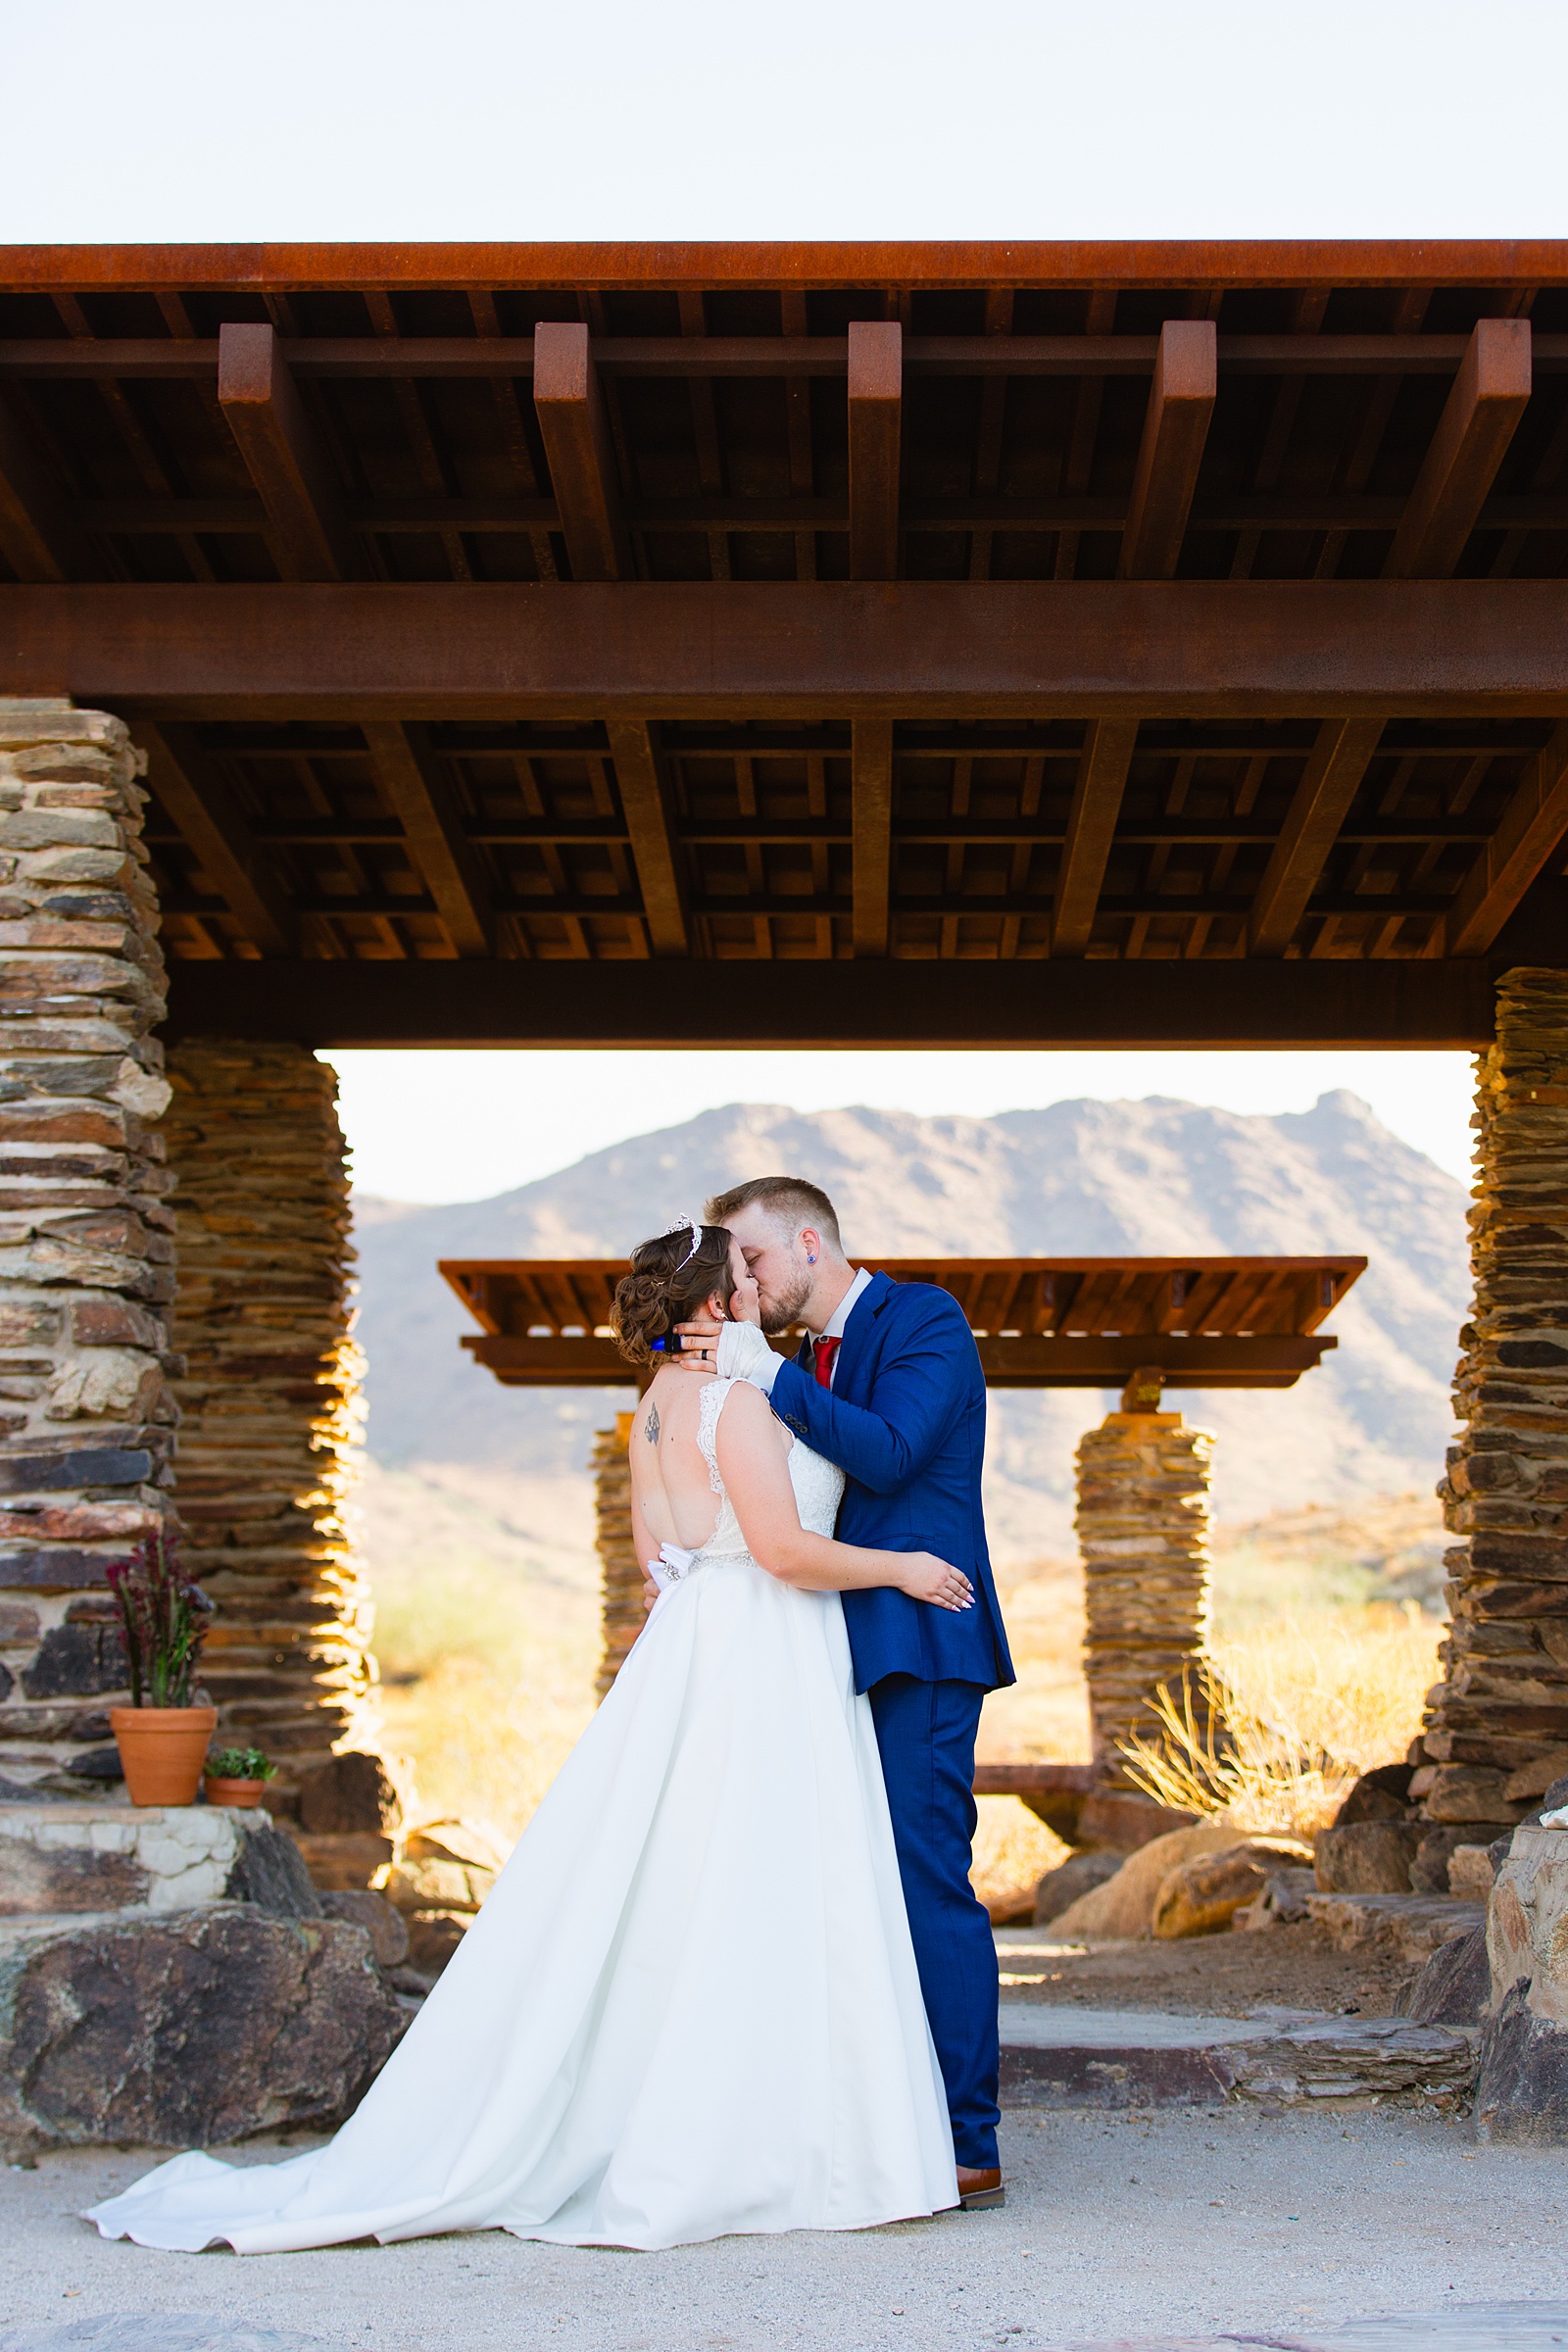 Bride and groom share their first kiss during their wedding ceremony at intimate desert by Arizona wedding photographer Juniper and Co Photography.